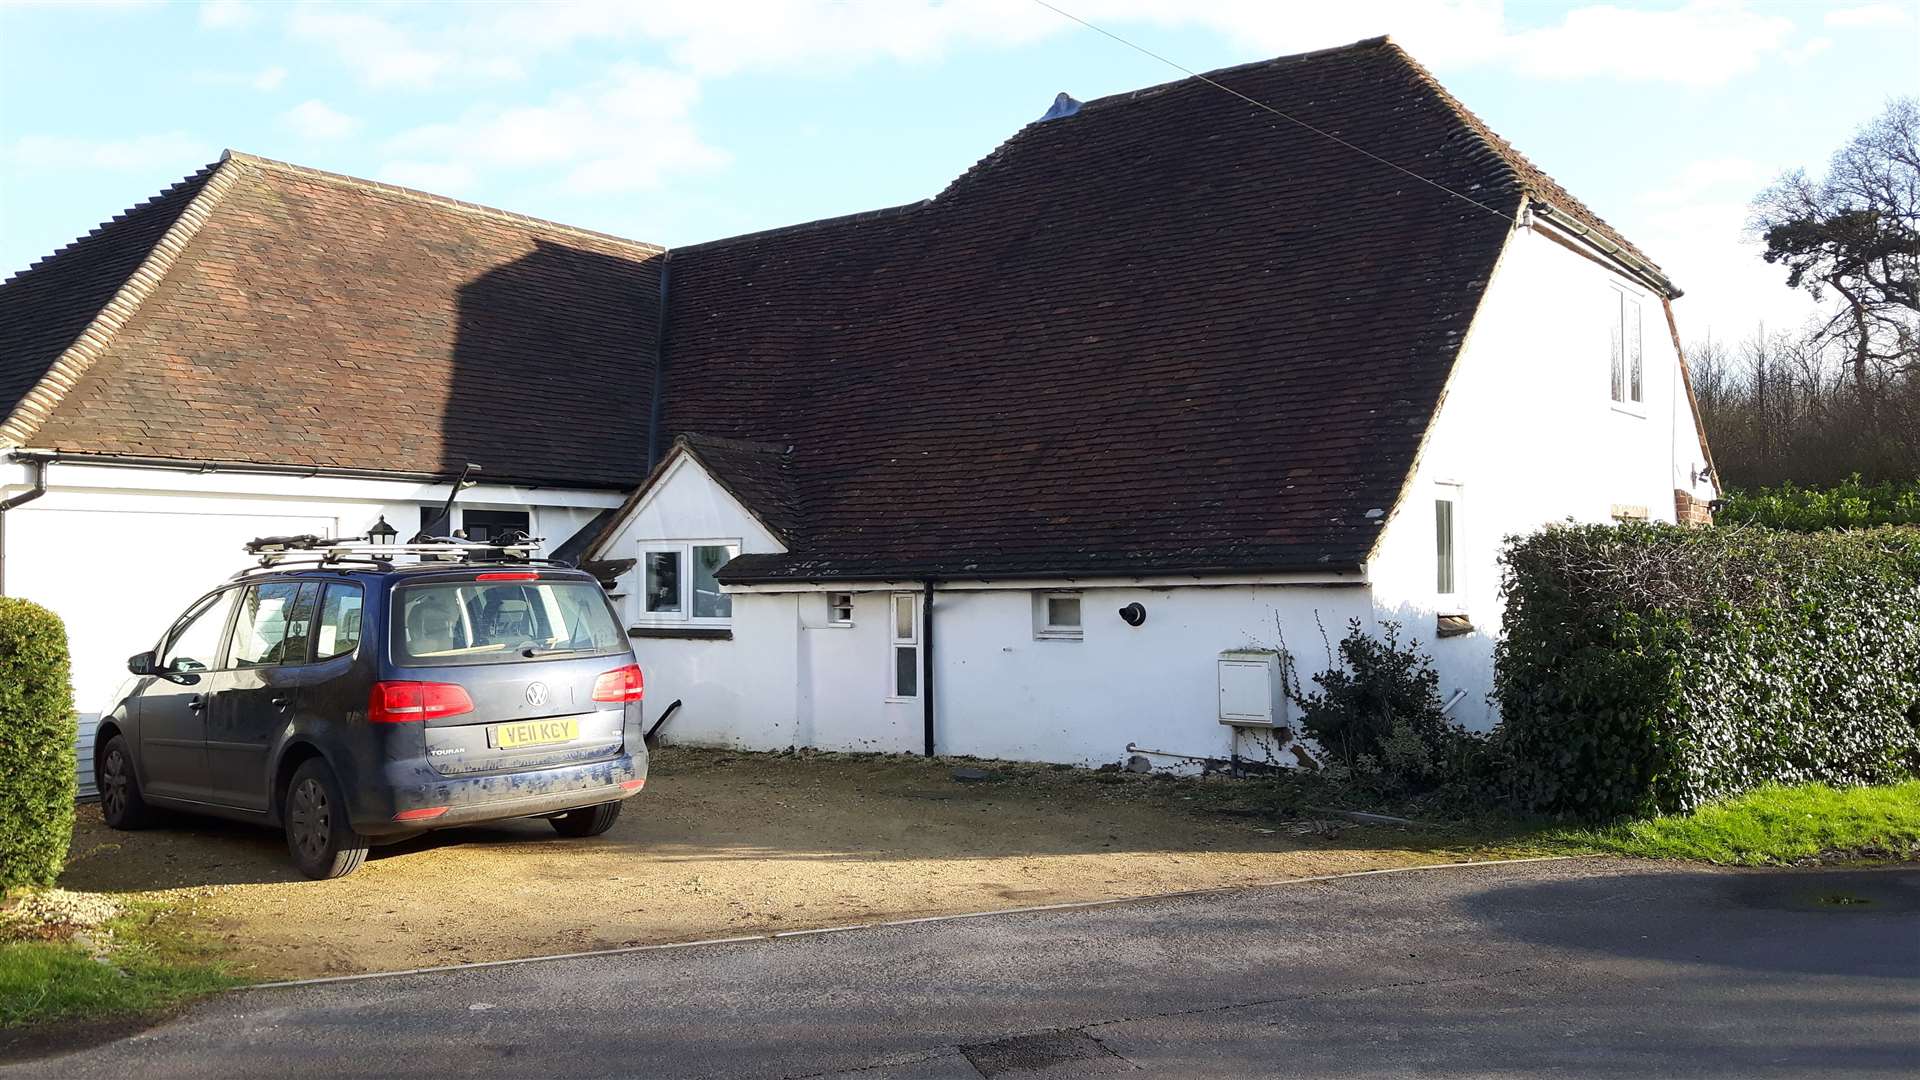 Freedom Hall (or Freeman Hall) as it is today in Gandy's Lane, Boughton Monchelsea